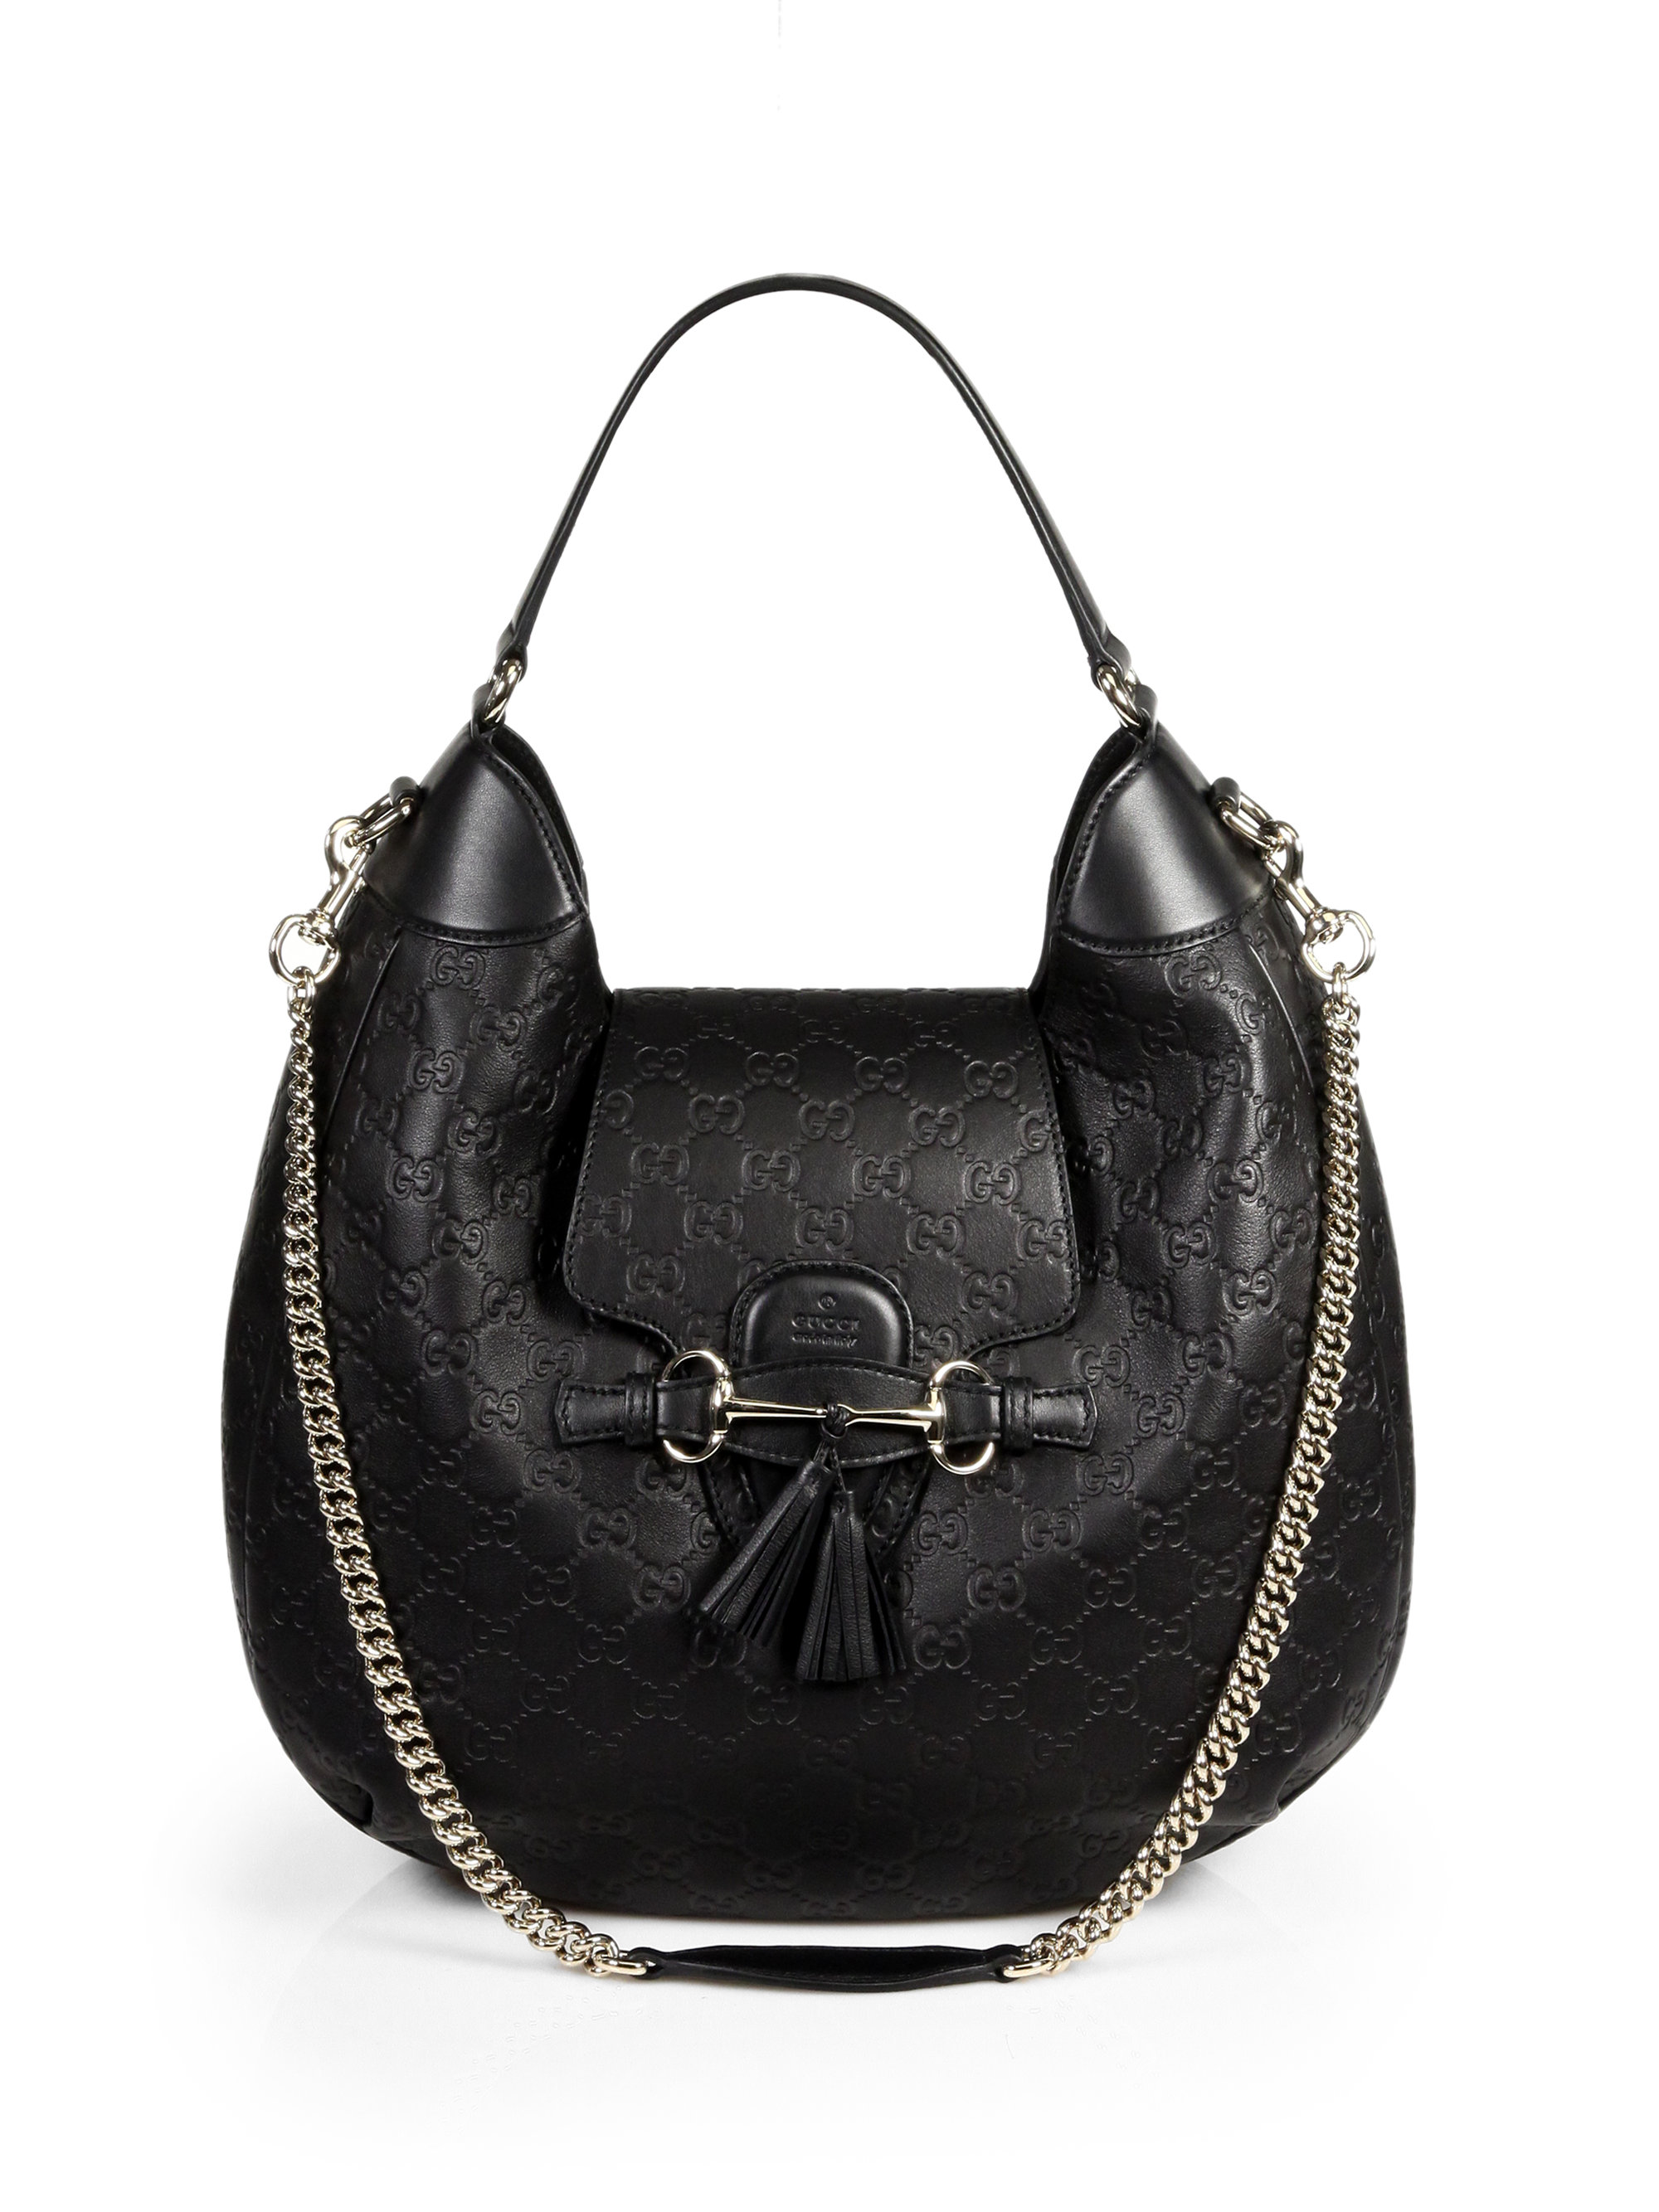 Gucci Emily Ssima Leather Hobo Bag in Black | Lyst